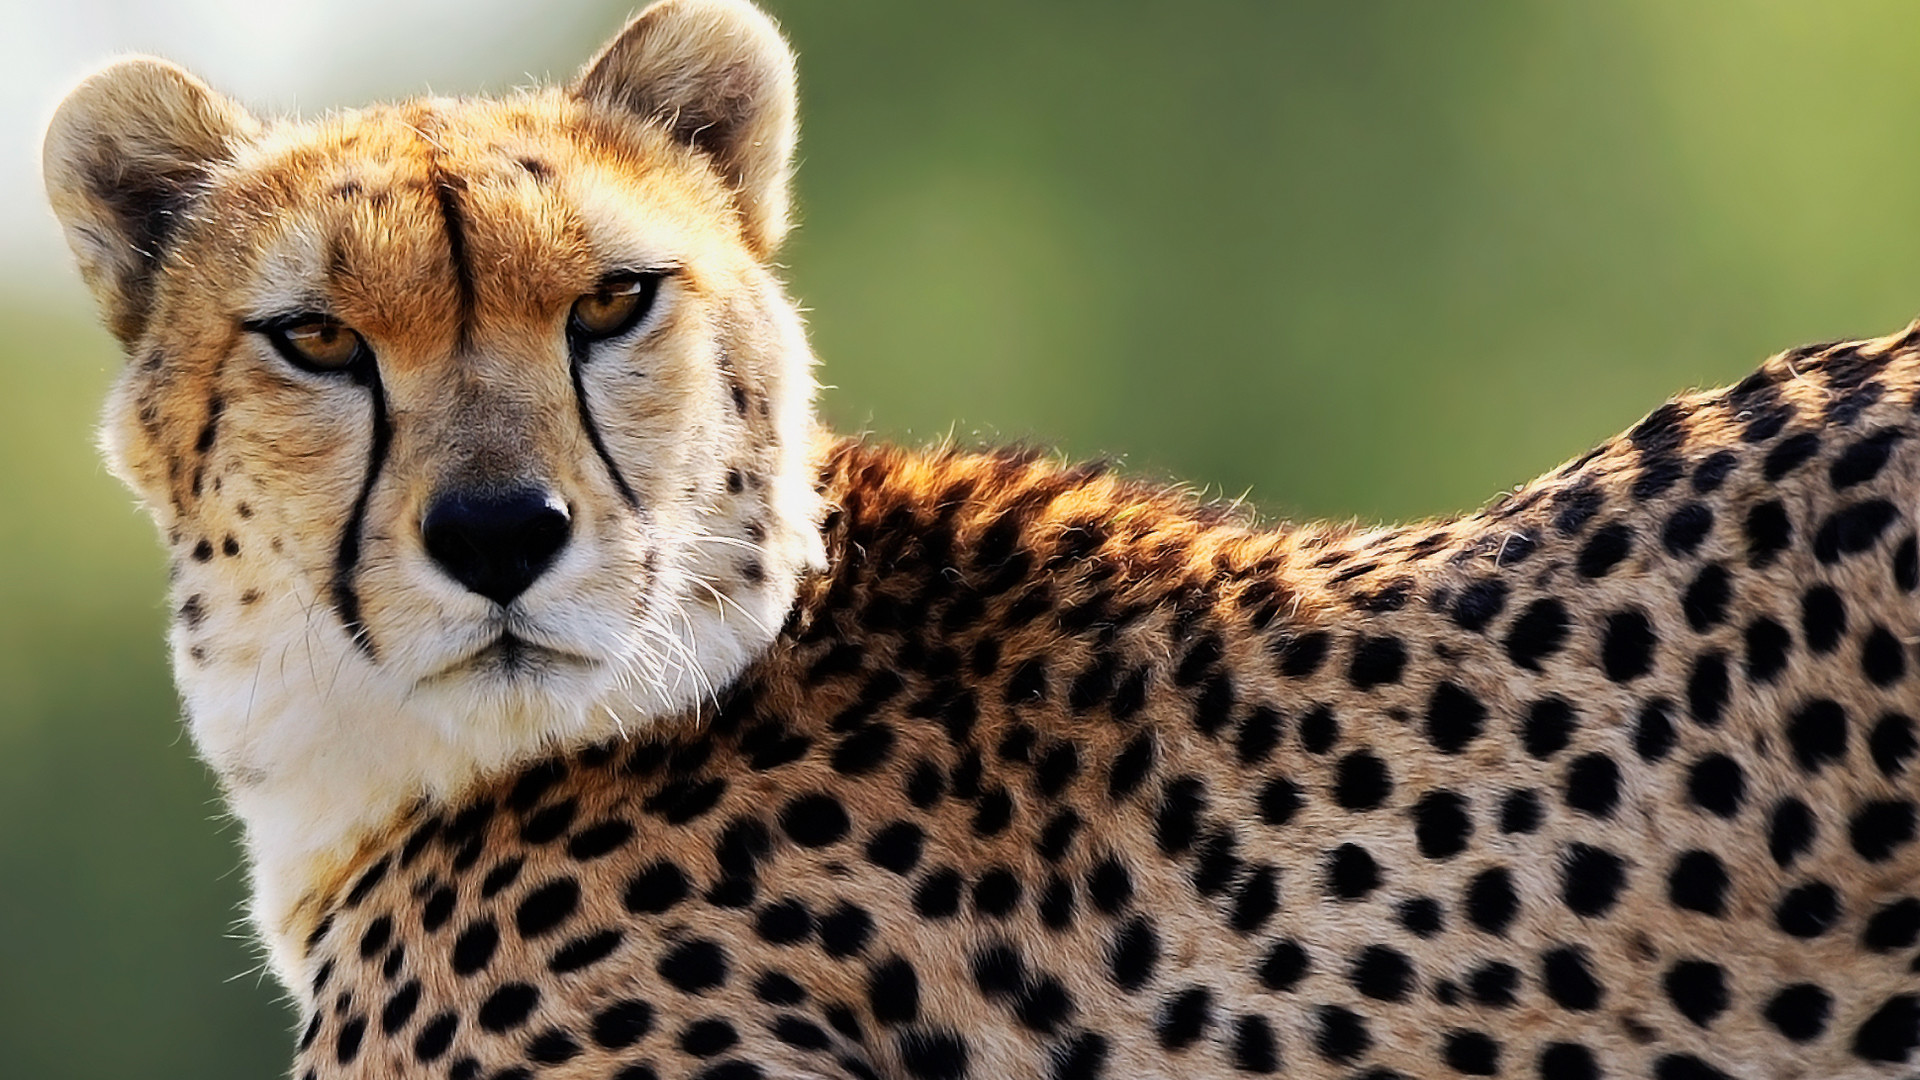 1920x1080 pictures cheetah wallpapers hd hd wallpapers amazing cool desktop wallpapers  for windows mac tablet download free 1920Ã1080 Wallpaper HD